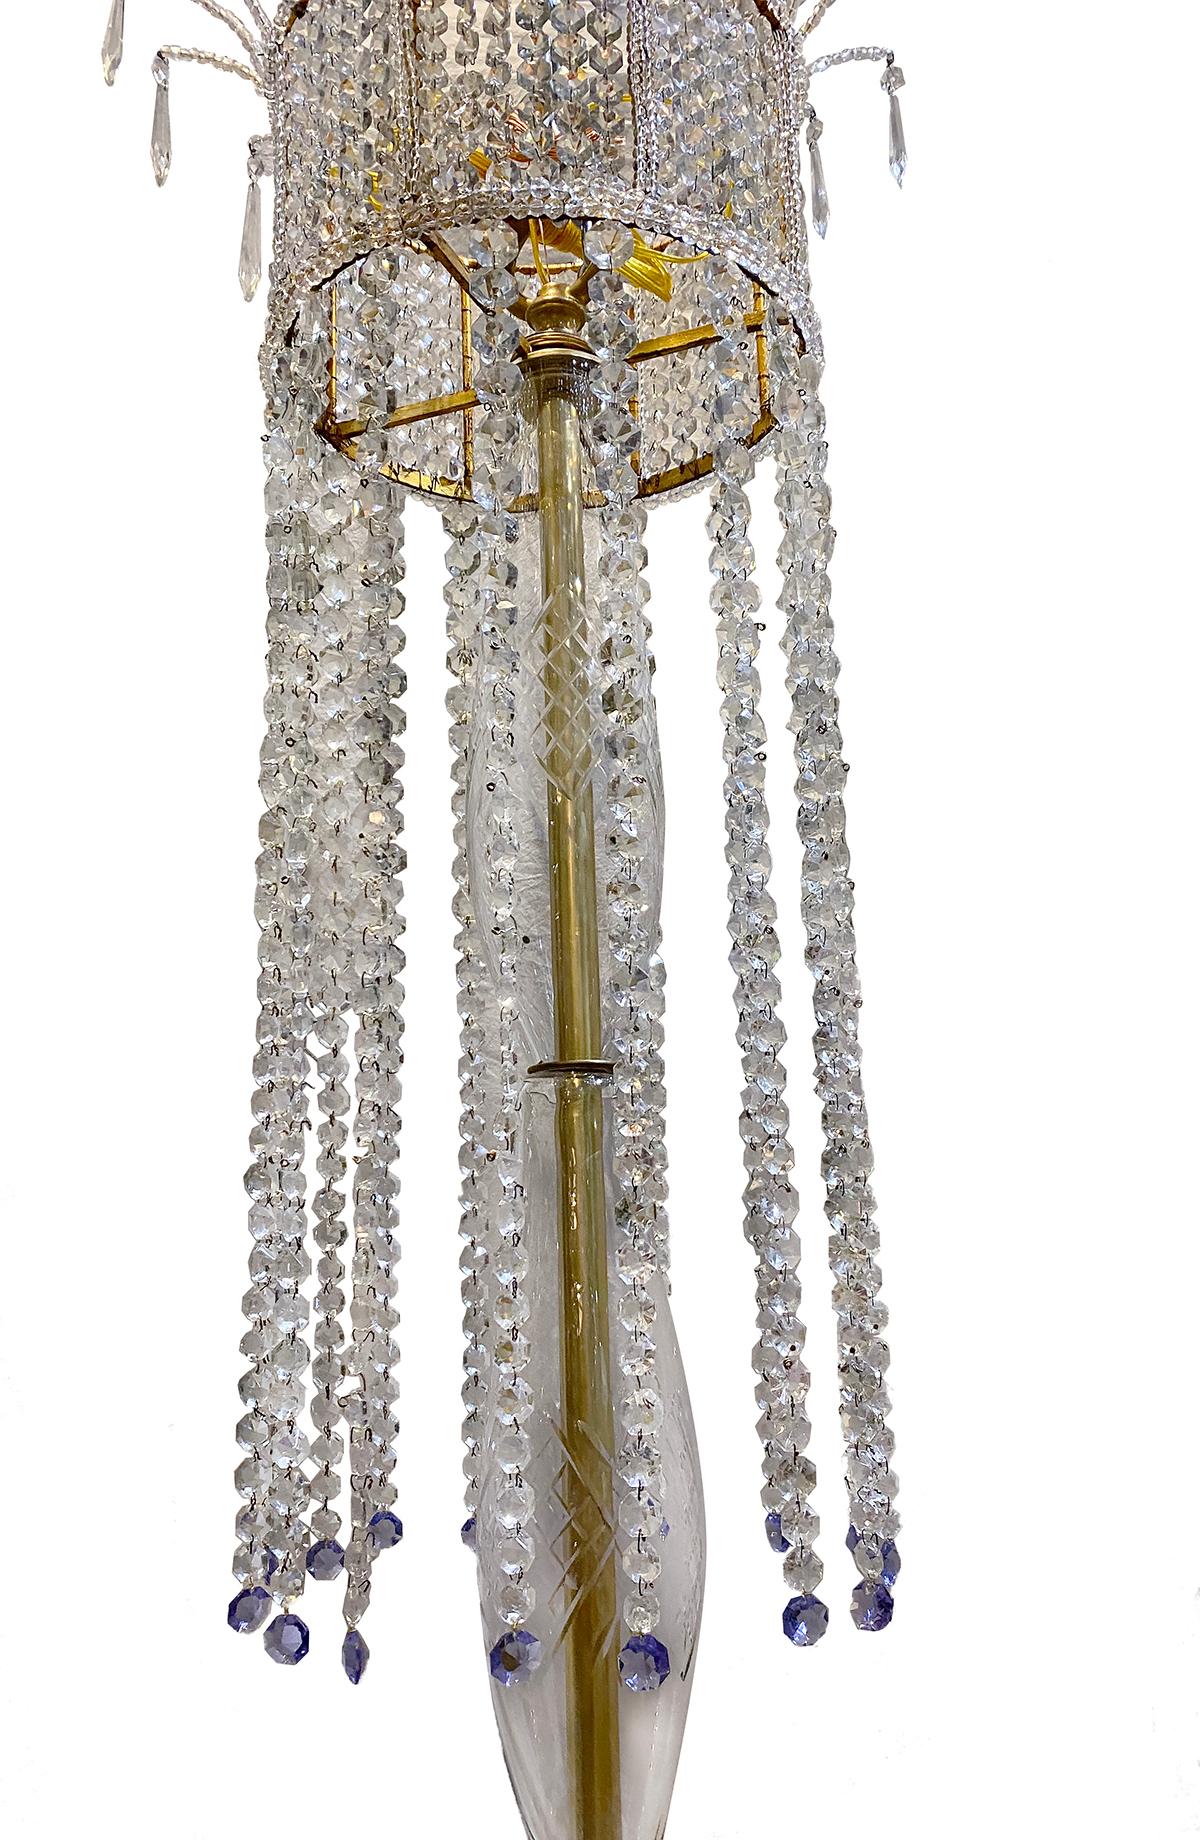 A very large French gilt metal and crystal chandelier with interior lights. The gilt metal body has beaded crystal drops and the interior lights are covered by woven crystals from the top.

Measurements:
Height 76